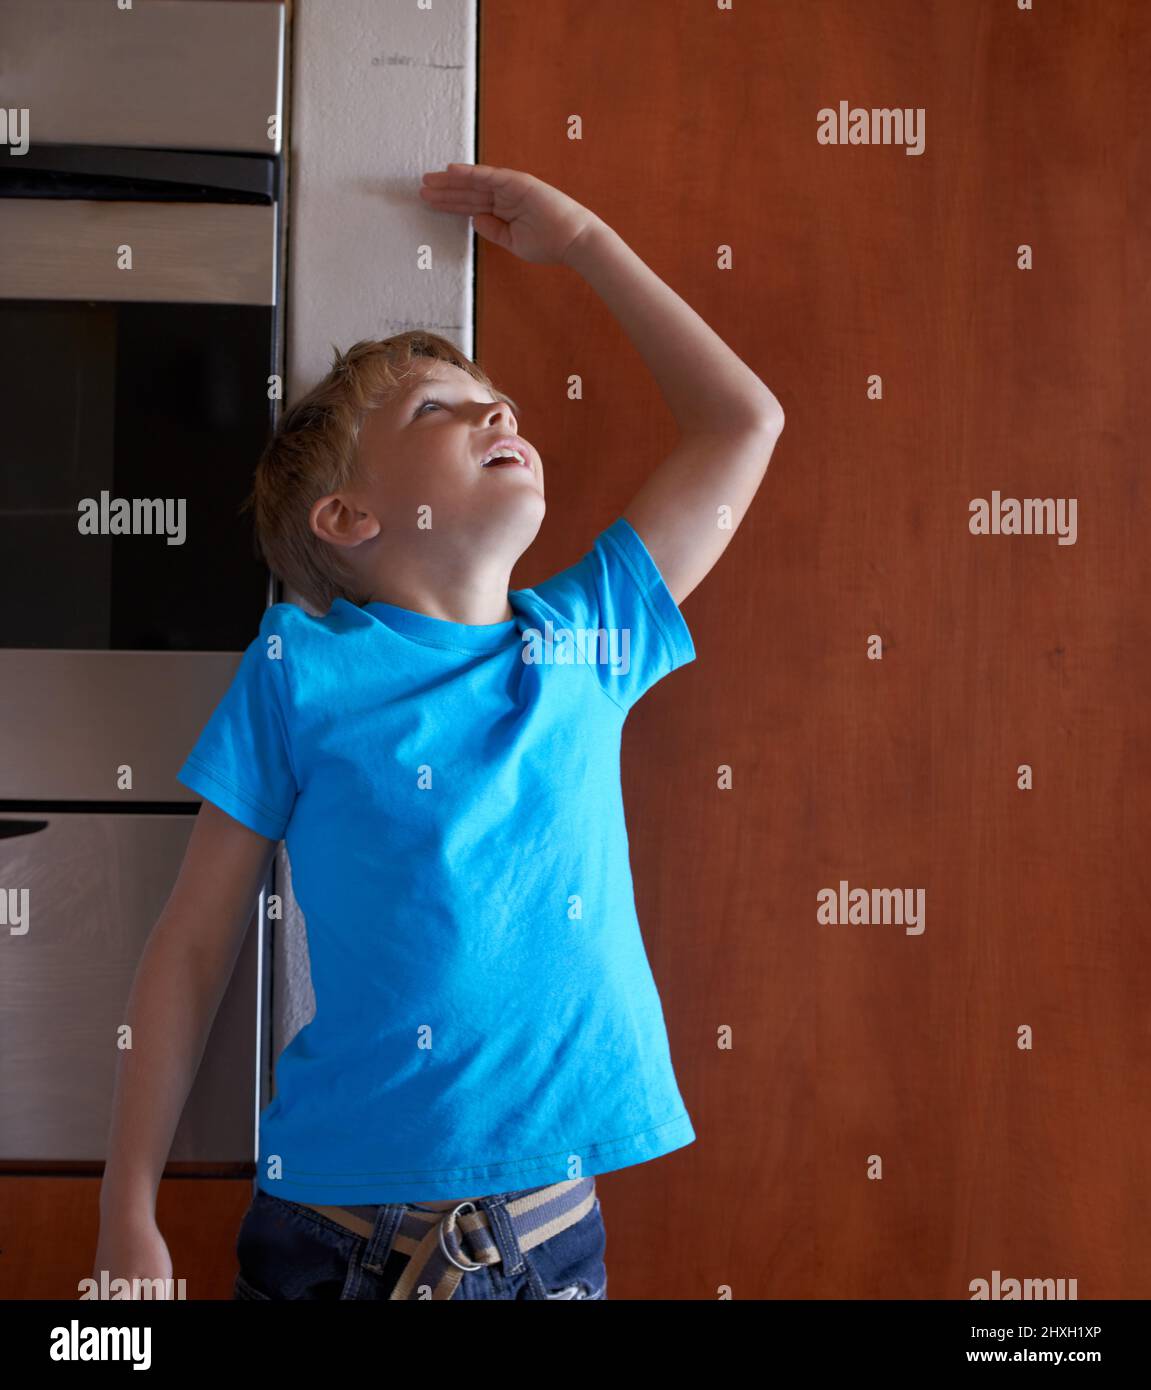 Hes growing fast. A young boy measuring his height at home. Stock Photo